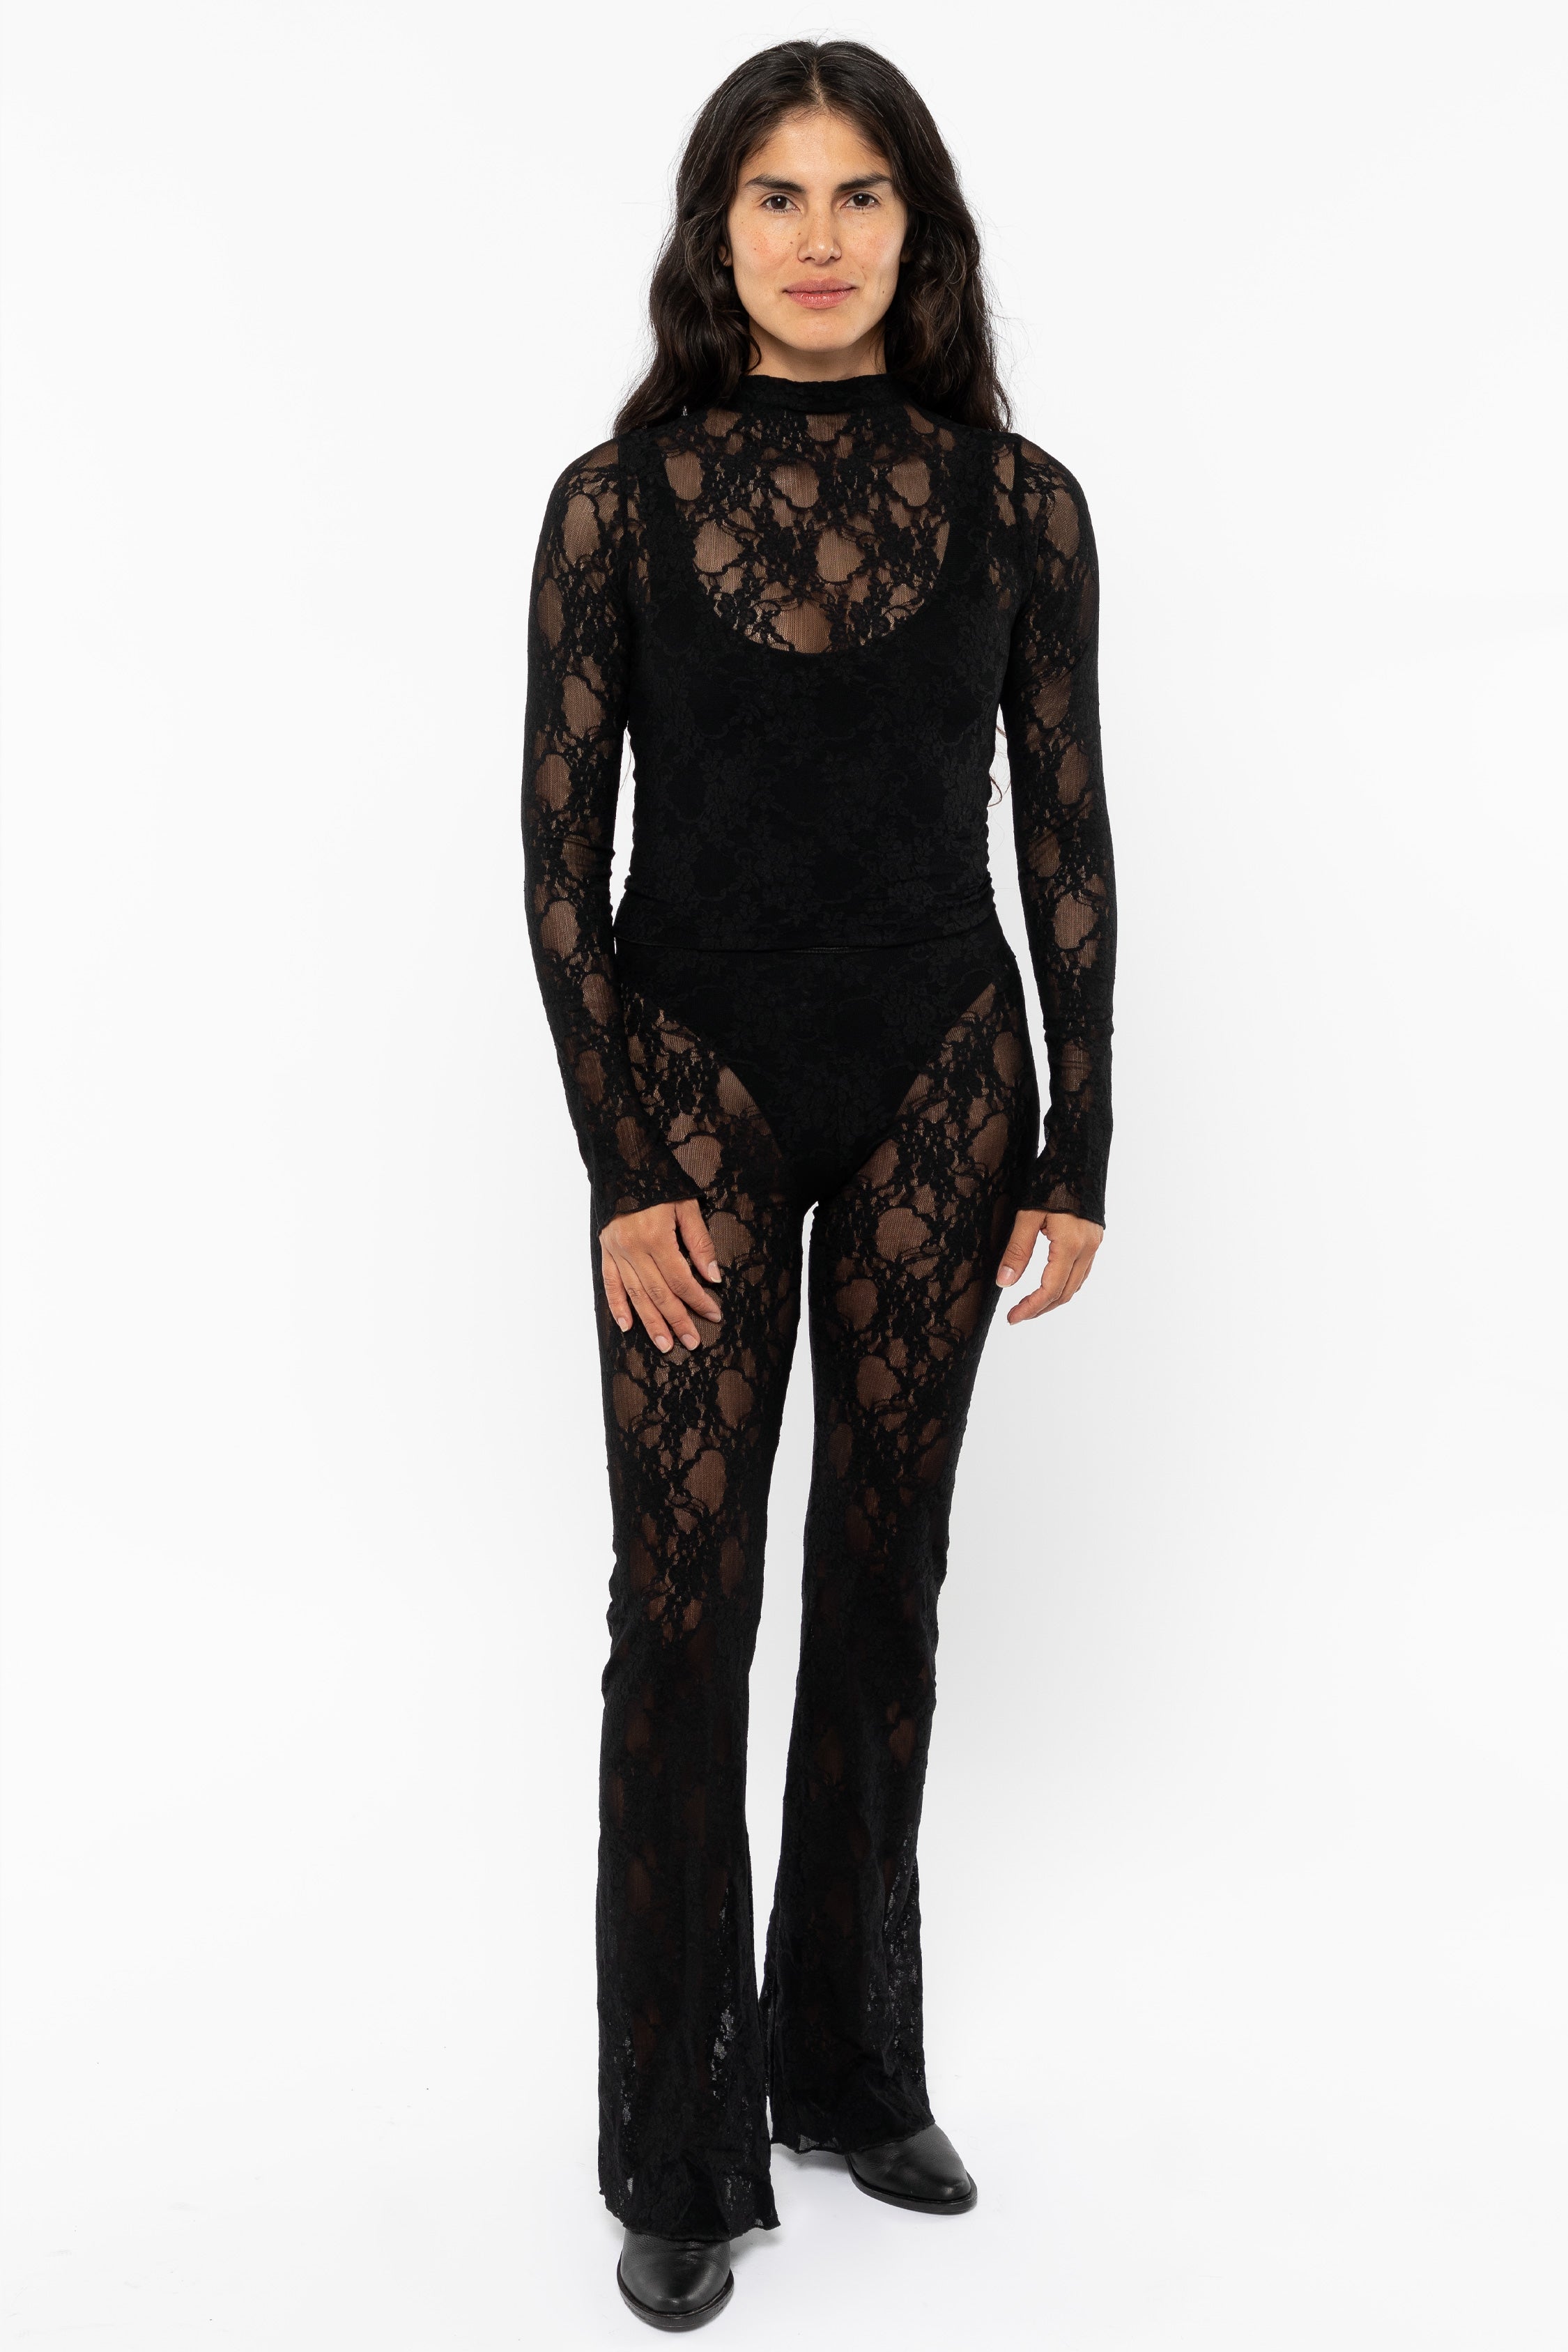 Floral Sequined Plunging Neck Long Sleeve Bodysuit BLACK: Rompers, ZAFUL